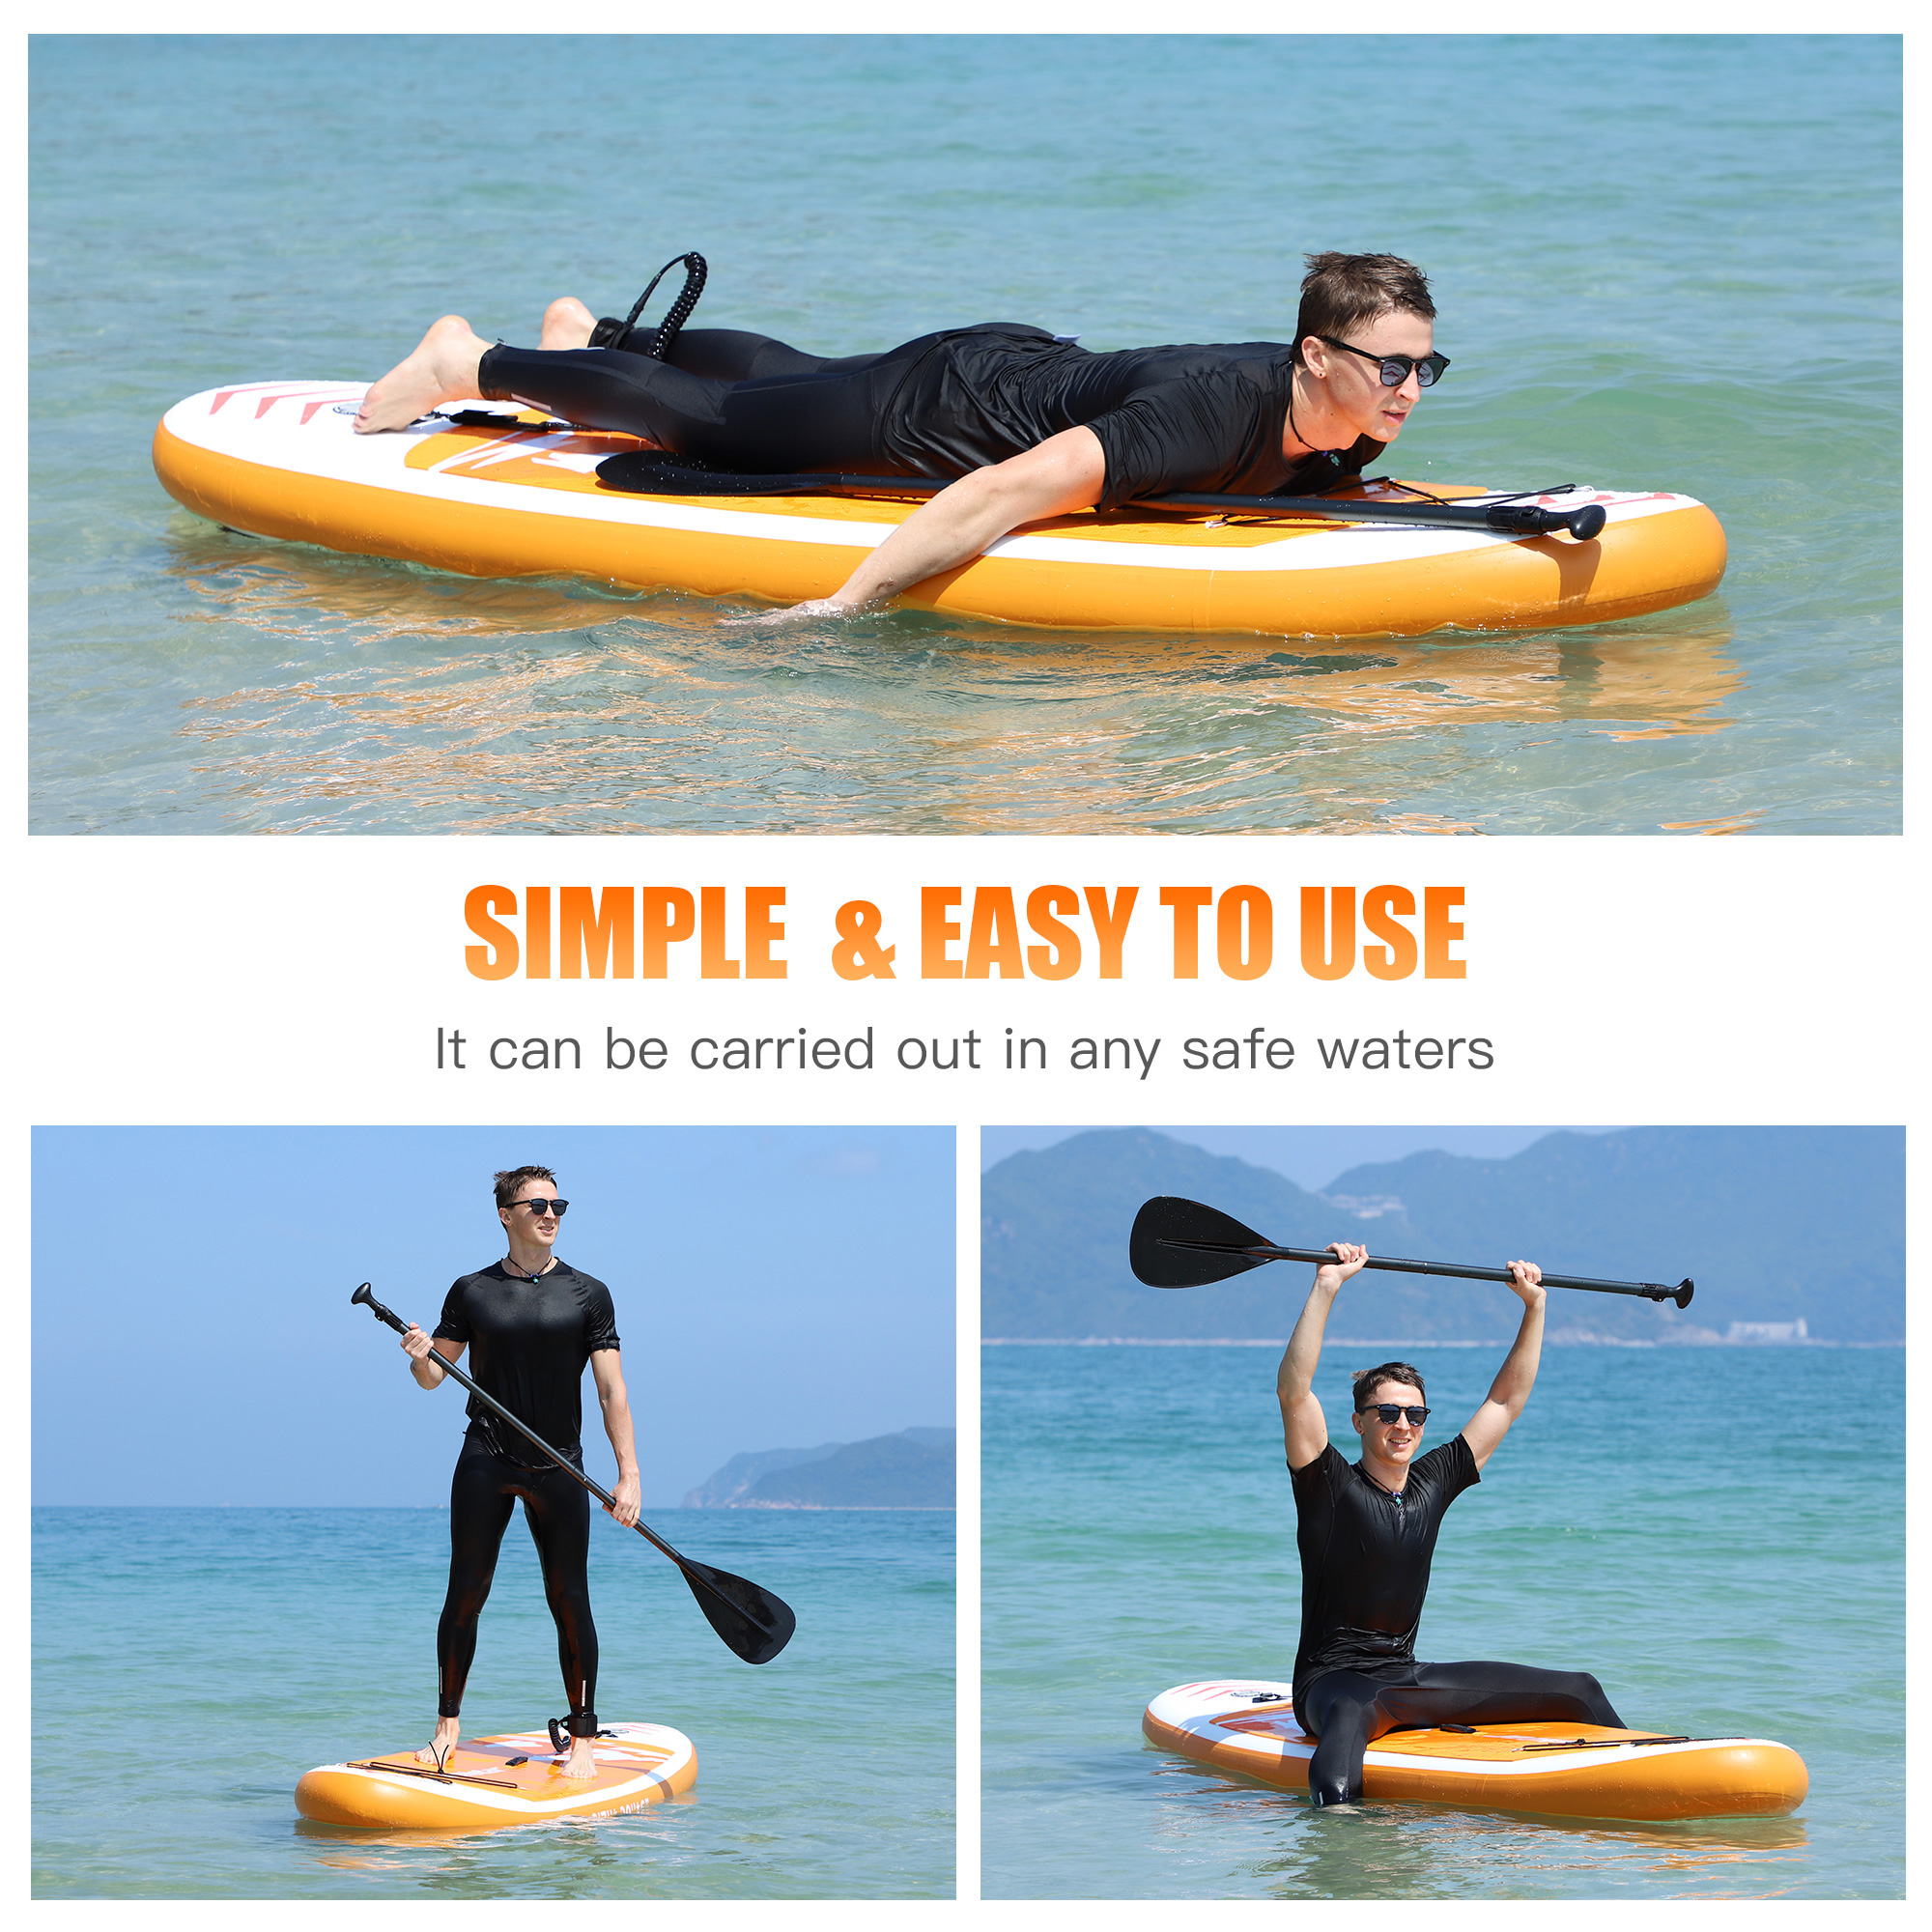 Famistar 8'7" Inflatable Stand Up Paddle Board SUP w/ 3 Fins, Adjustable Paddle, Pump & Carrying Backpack - image 2 of 13